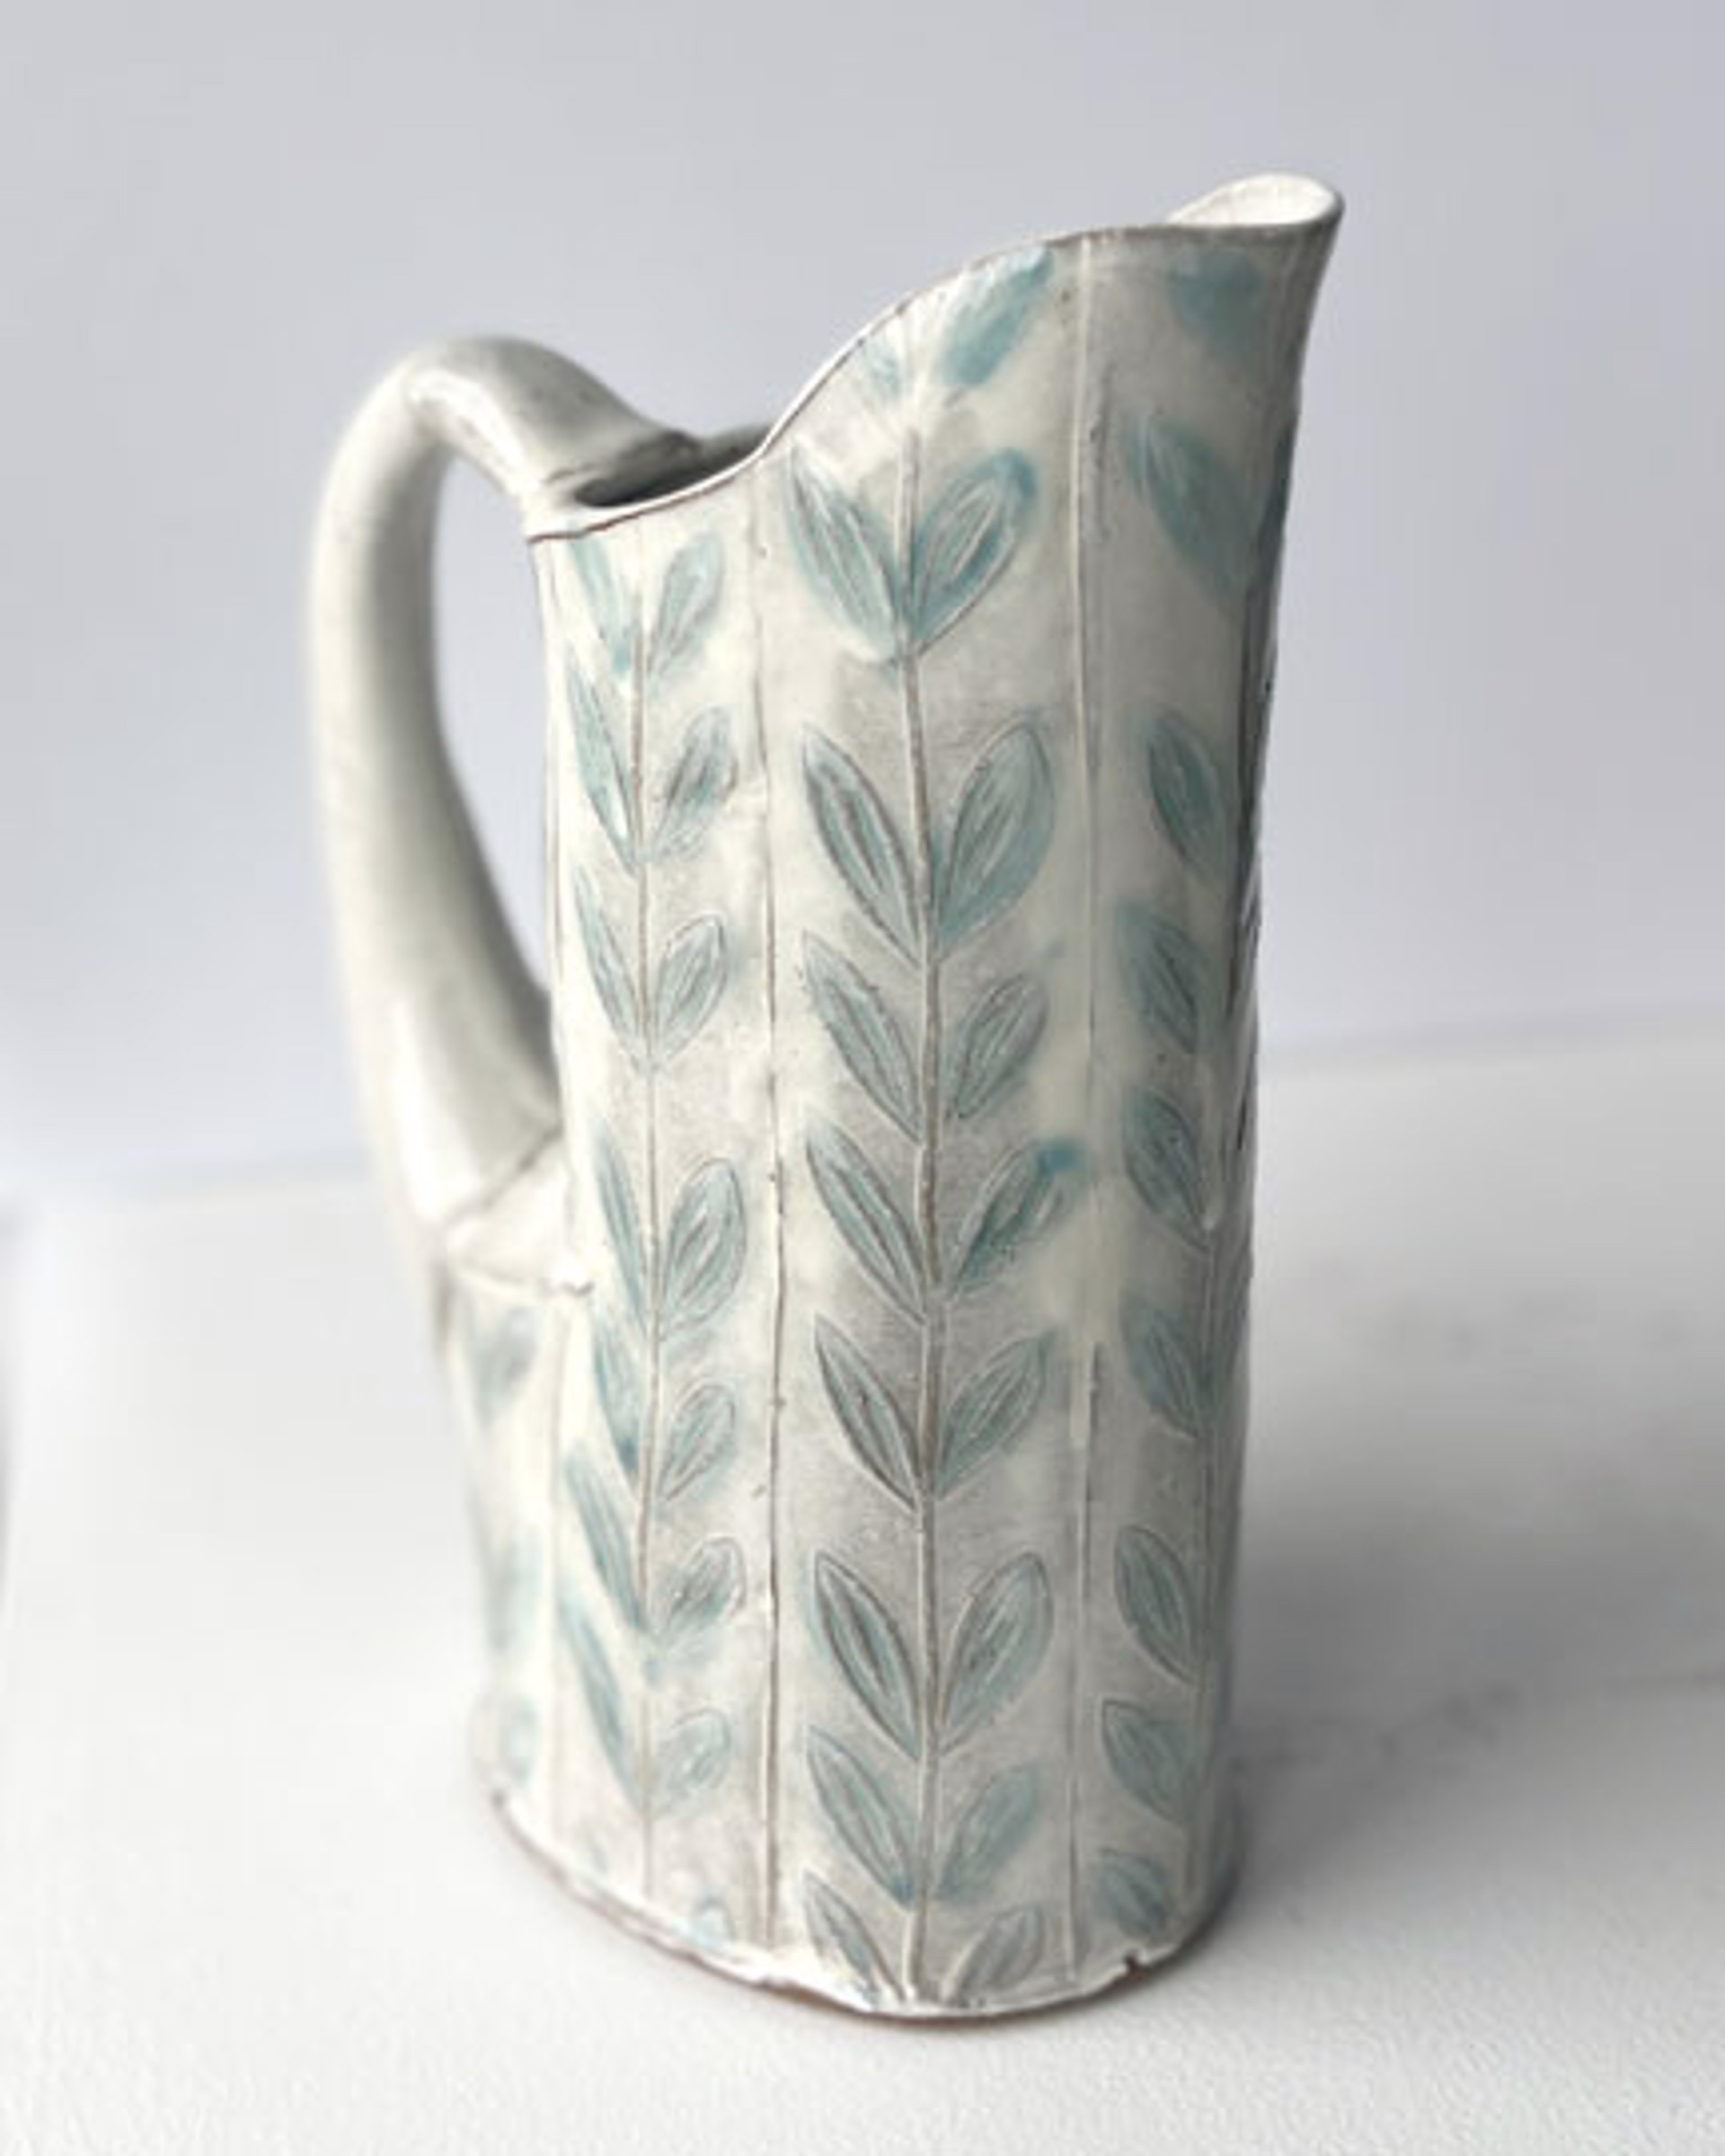 Pitcher with Aqua Leaves by Jennifer Allen